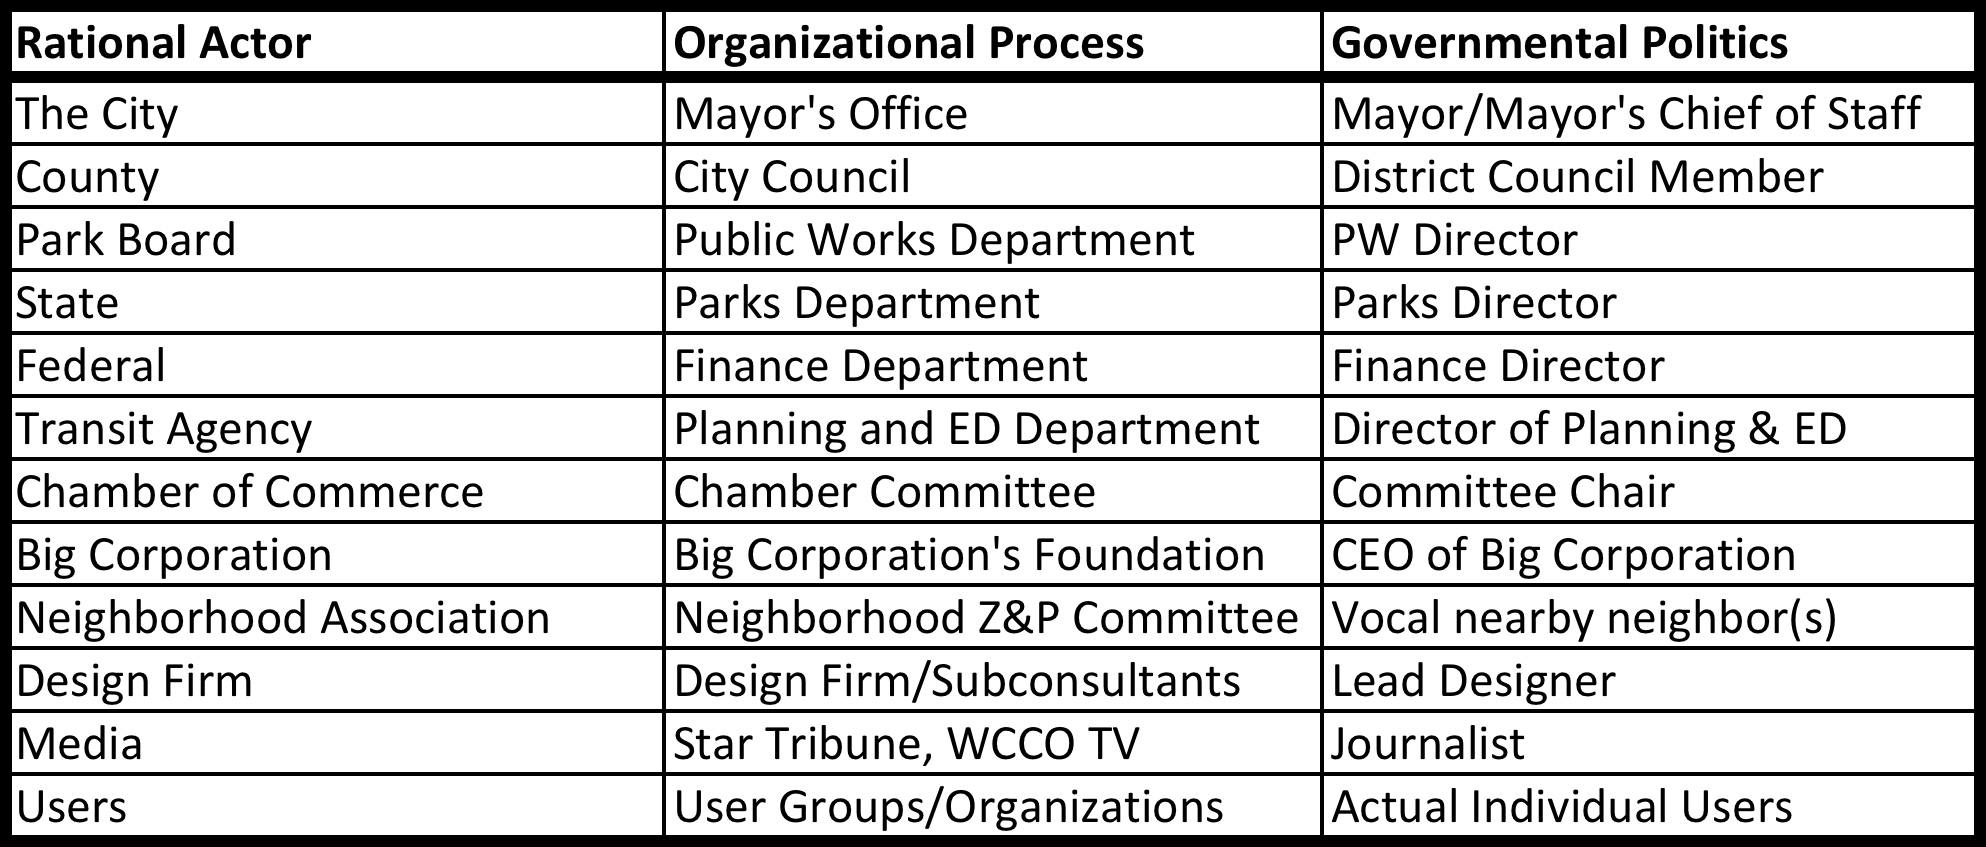 Table showing three potential types of actors - rational, organizational, and governmental.